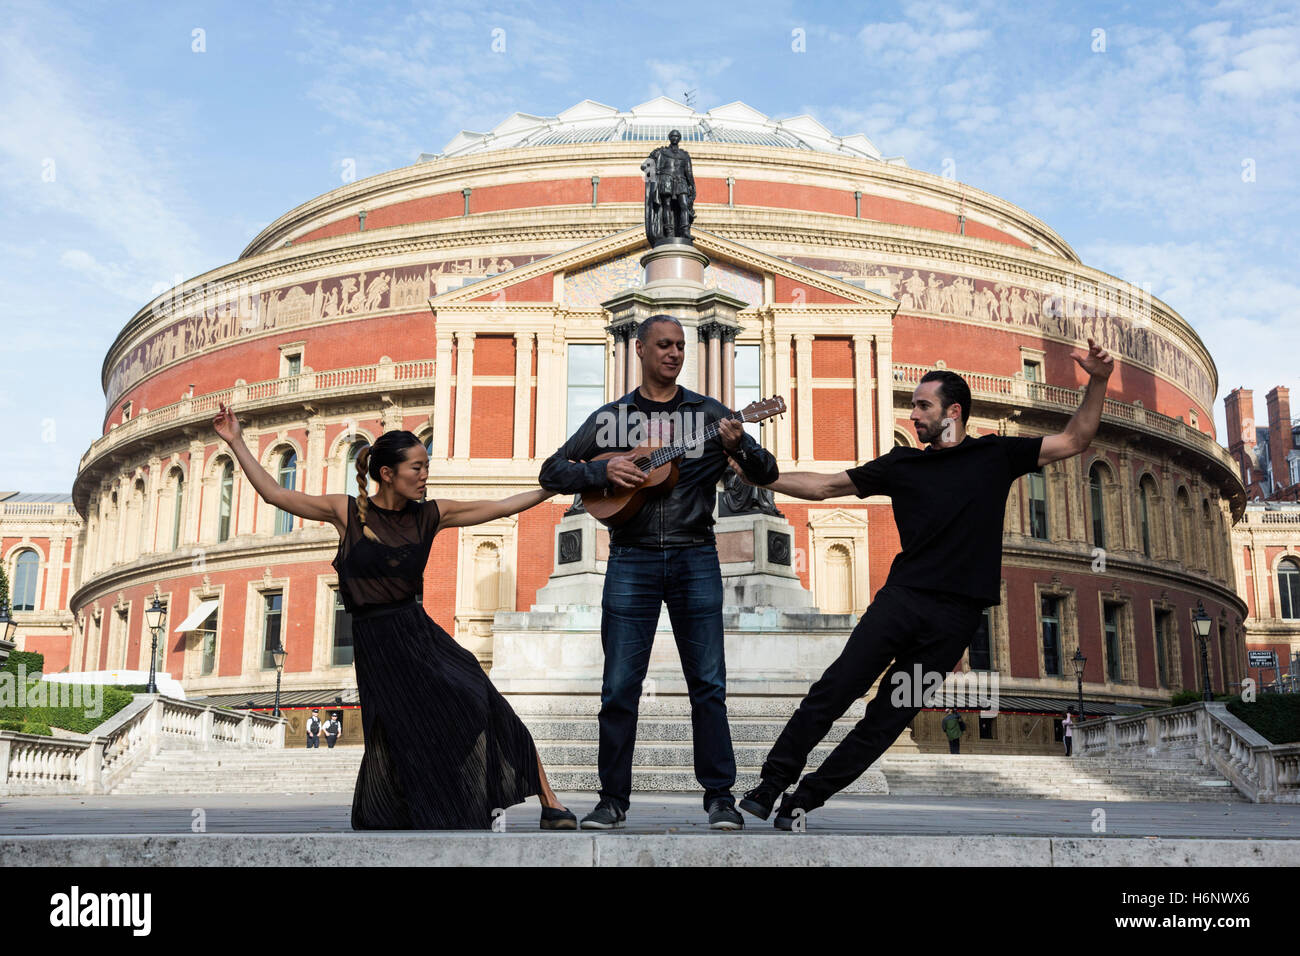 London, UK. 31 October 2016. British Indian musician, producer and composer Nitin Sawhney will perform a one-off show at the Royal Albert Hall on Wednesday, 2 November, featuring music from his latest album Dystopian Dream. At a photocall on the QEII Diamond Jubilee Steps outside the Royal Albert Hall, Sawhney poses with hip hop dancers Sebastien Ramirez and Honji Wang. Stock Photo